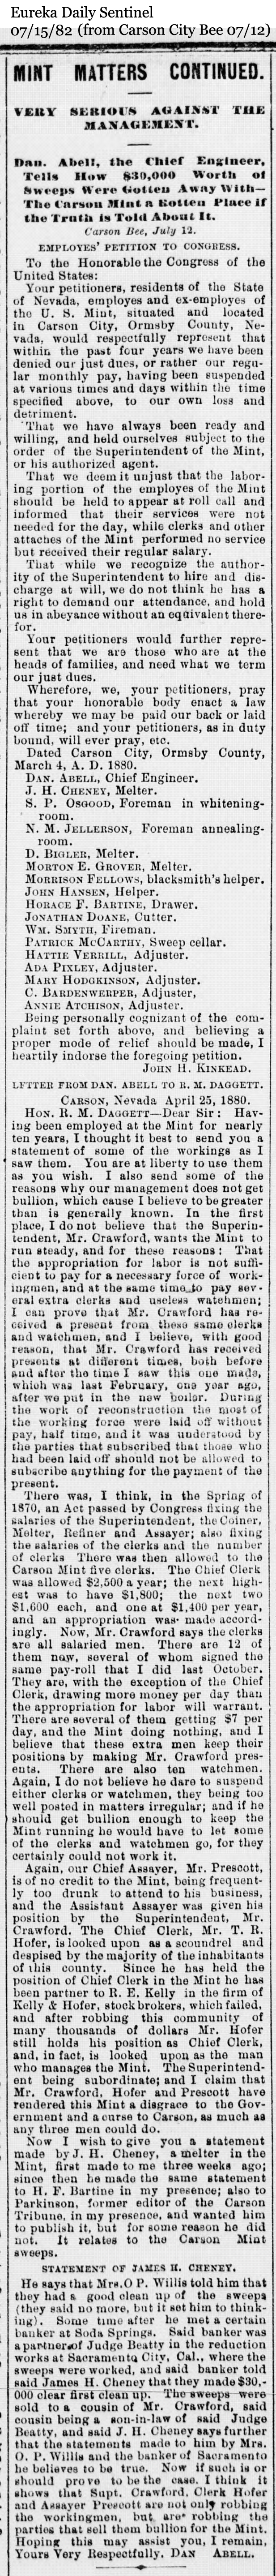 Article from Carson Bee July 15, 1882 accusations by employees against the Carson City Mint Management regarding theft and bribery